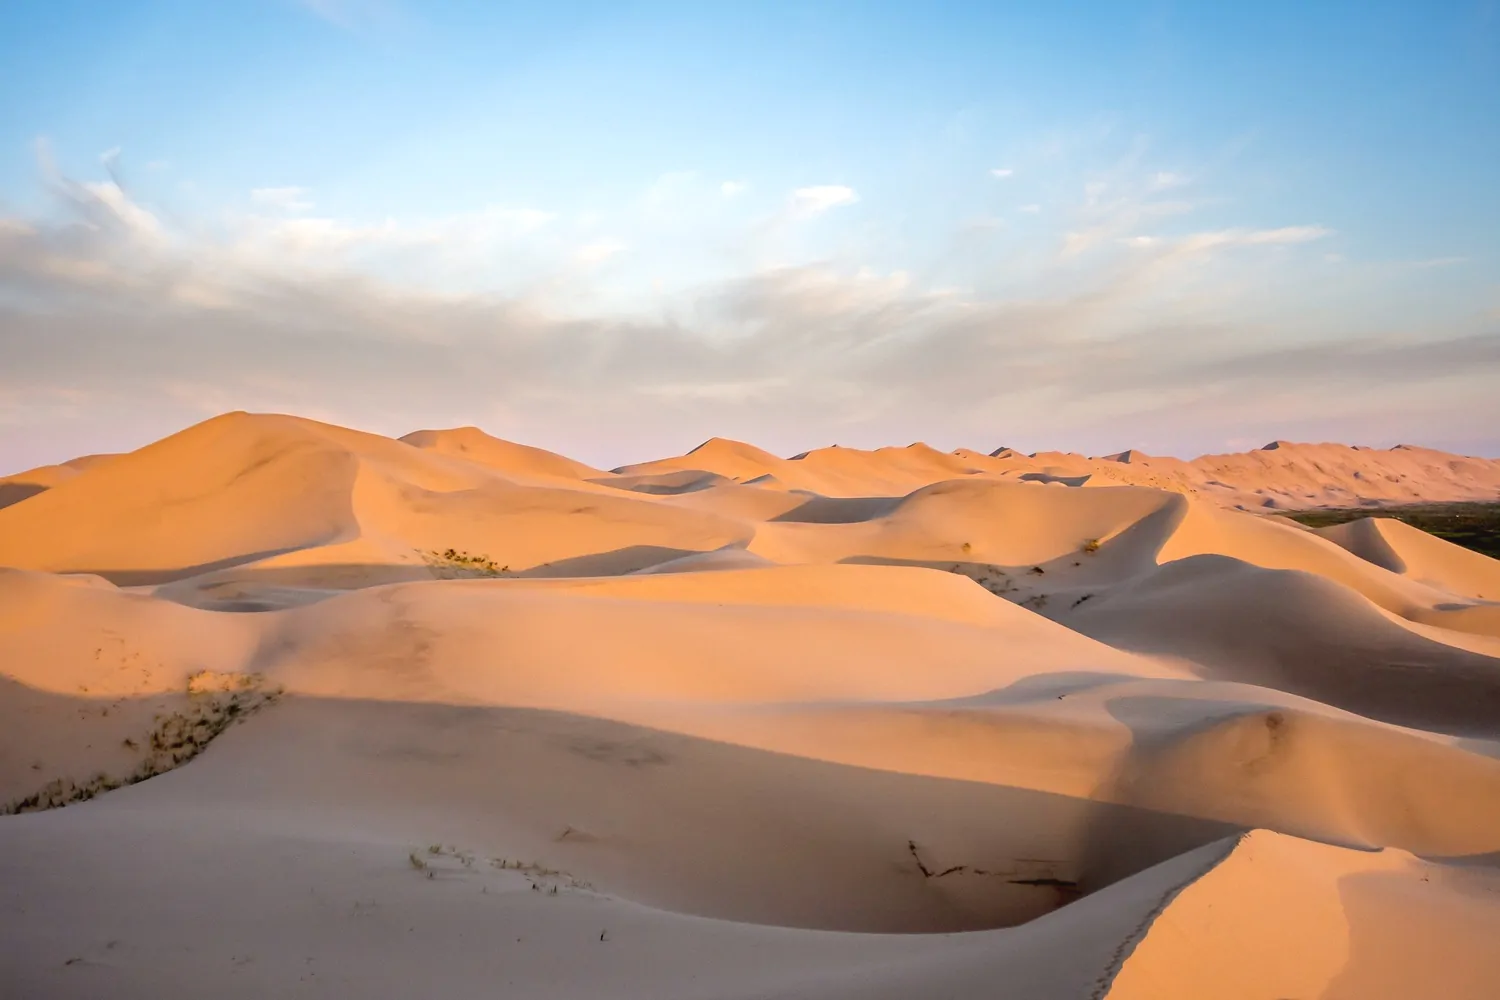 The Khongor Sand Dunes, also known as the 